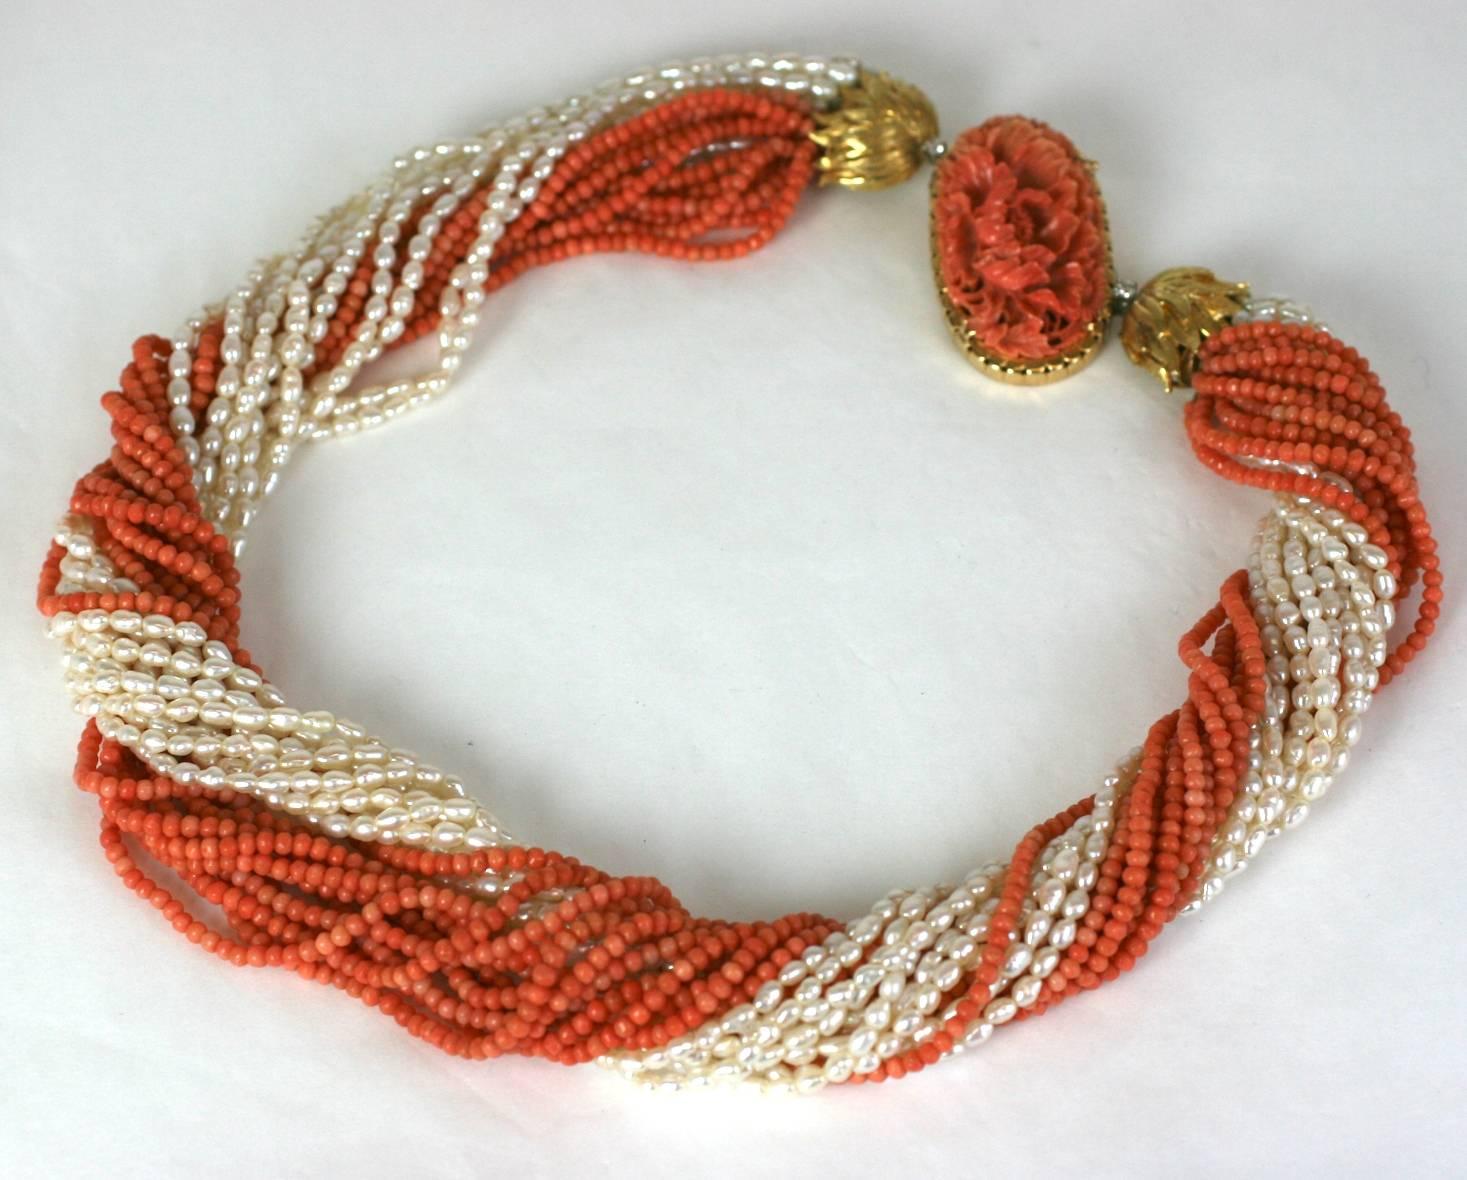 Elegant and attractive Carved Coral and Rice Pearl Torsade Necklace circa 1960's. Custom ordered design with finely carved coral crysanthemum panel (antique) set in an heavy 18k gold clasp. There are 18k gold foliate hilts which hold the beads with